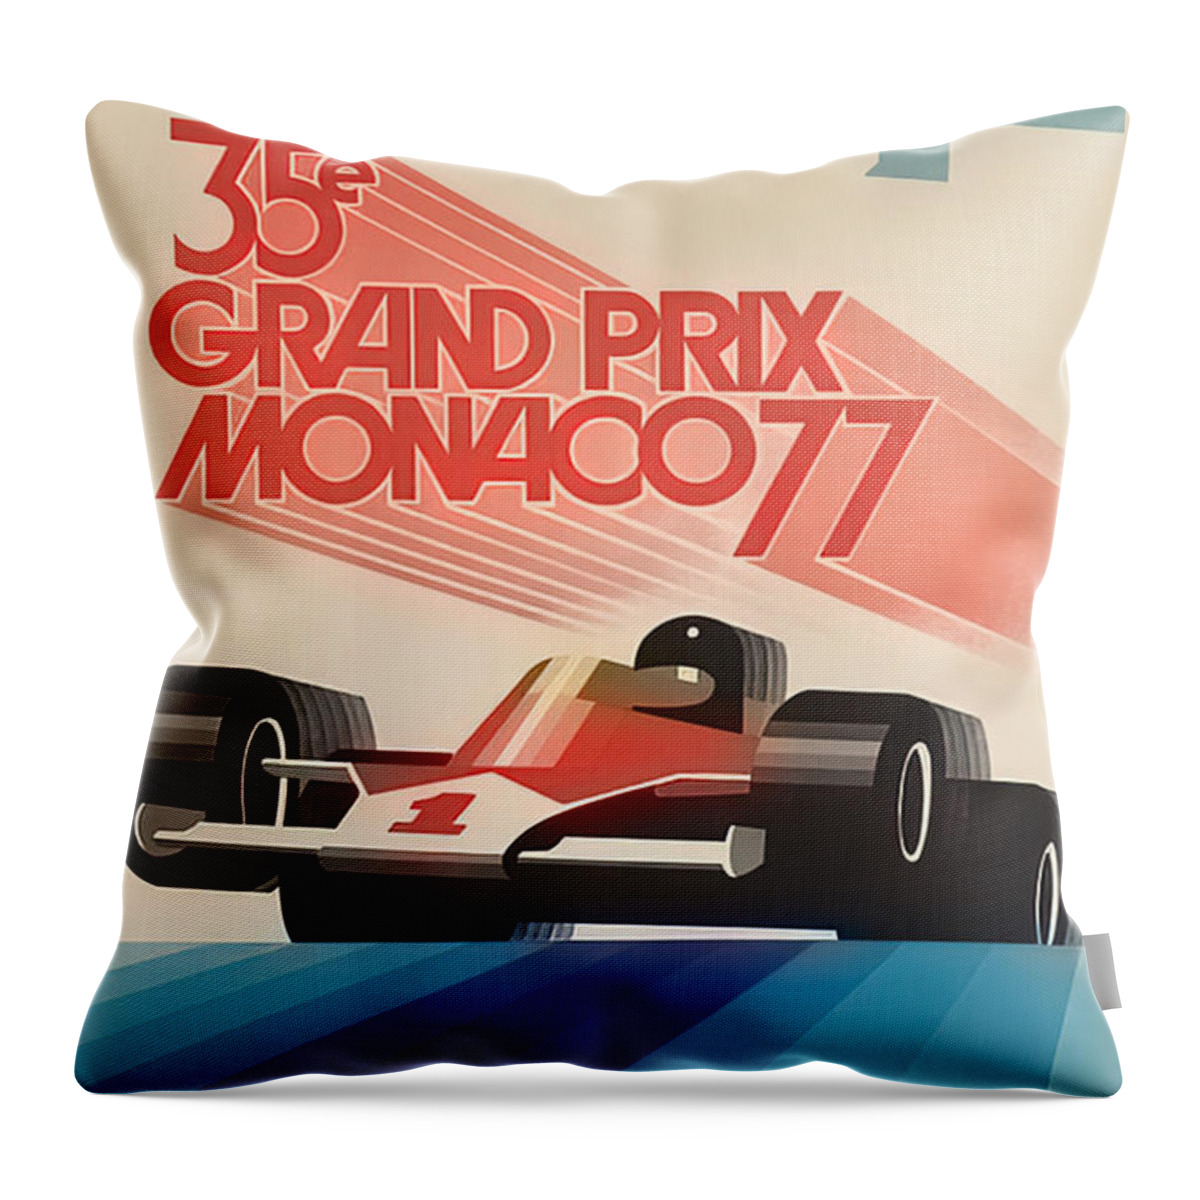 Vintage Throw Pillow featuring the mixed media 1977 35th Monaco Grand Prix Racing Poster Featuring Ferrari by Retrographs